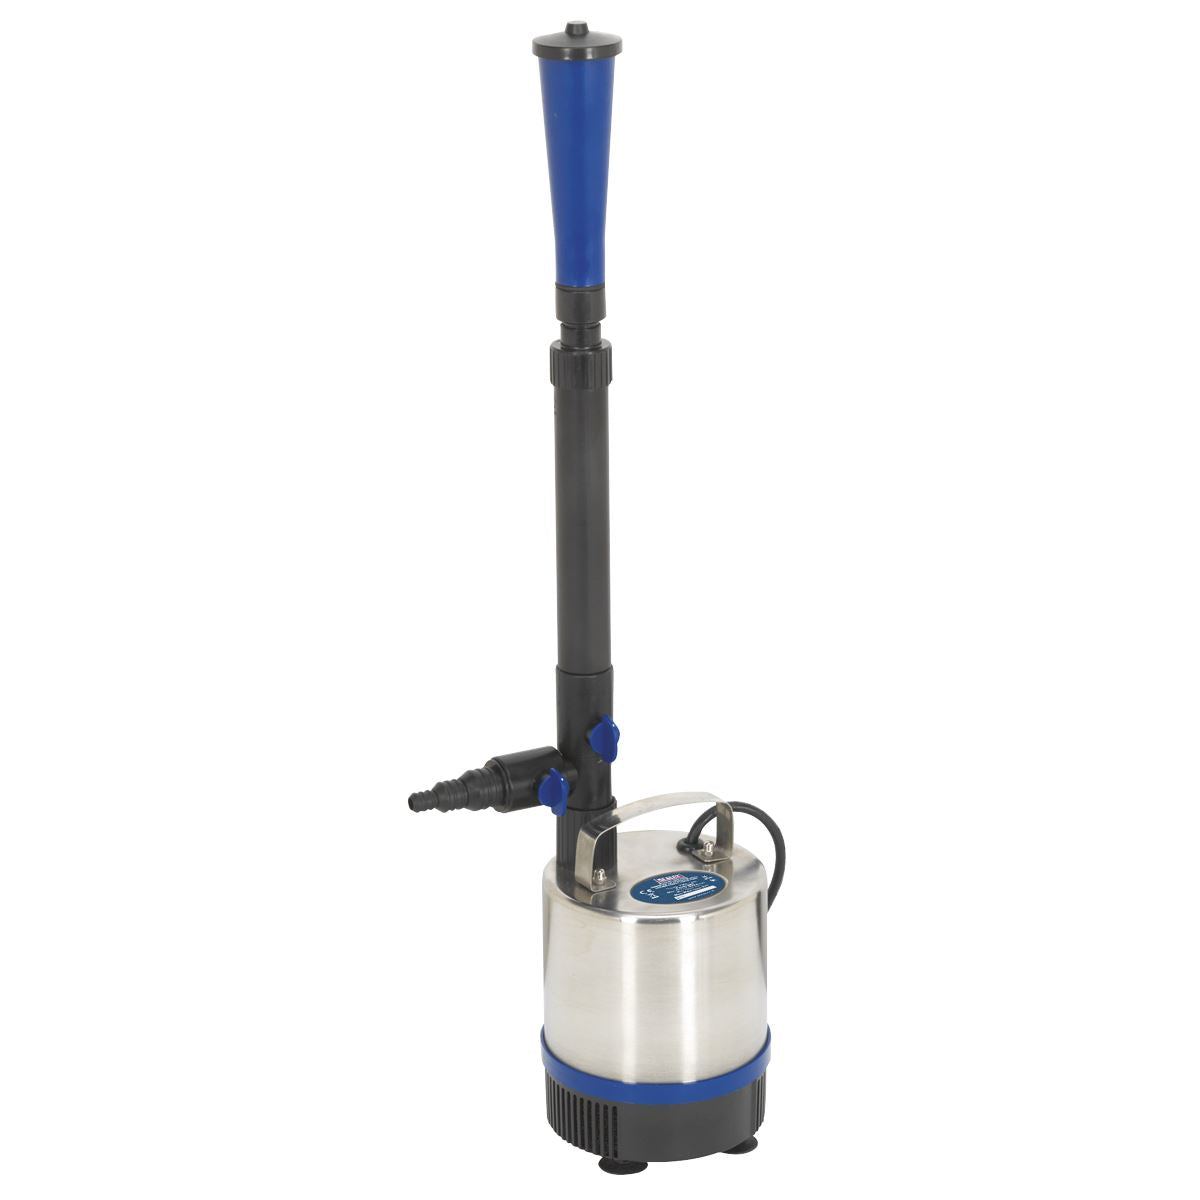 Sealey Submersible Pond Pump Stainless Steel 3000L/hr 230V